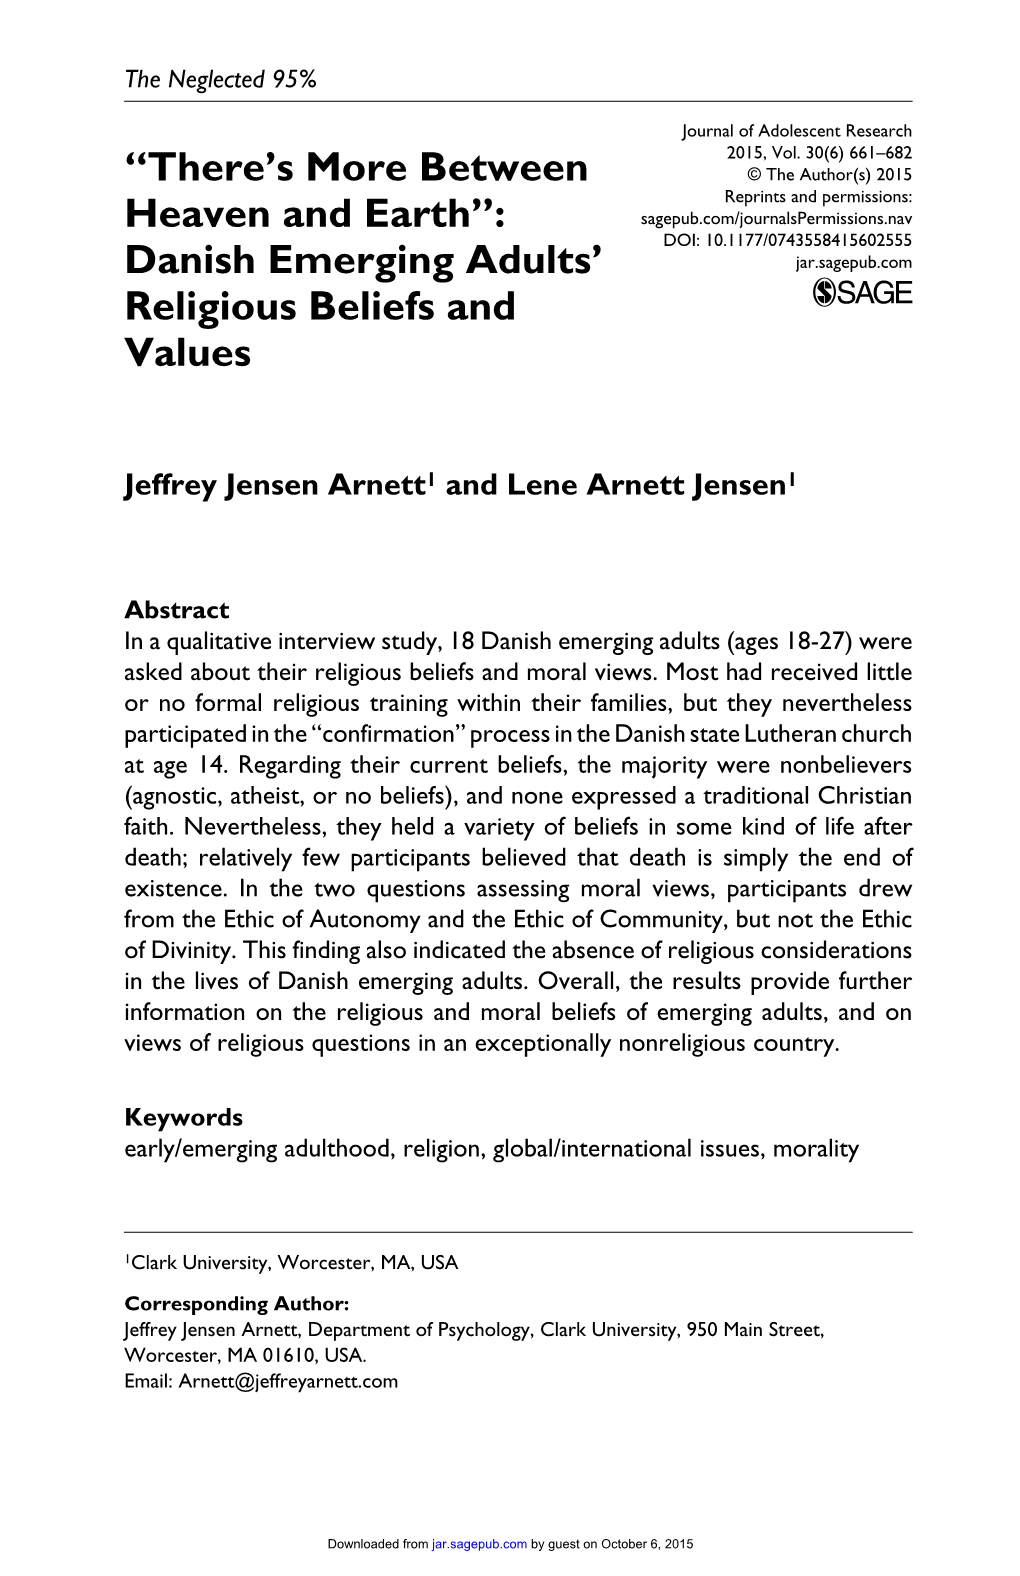 Danish Emerging Adults' Religious Beliefs and Values